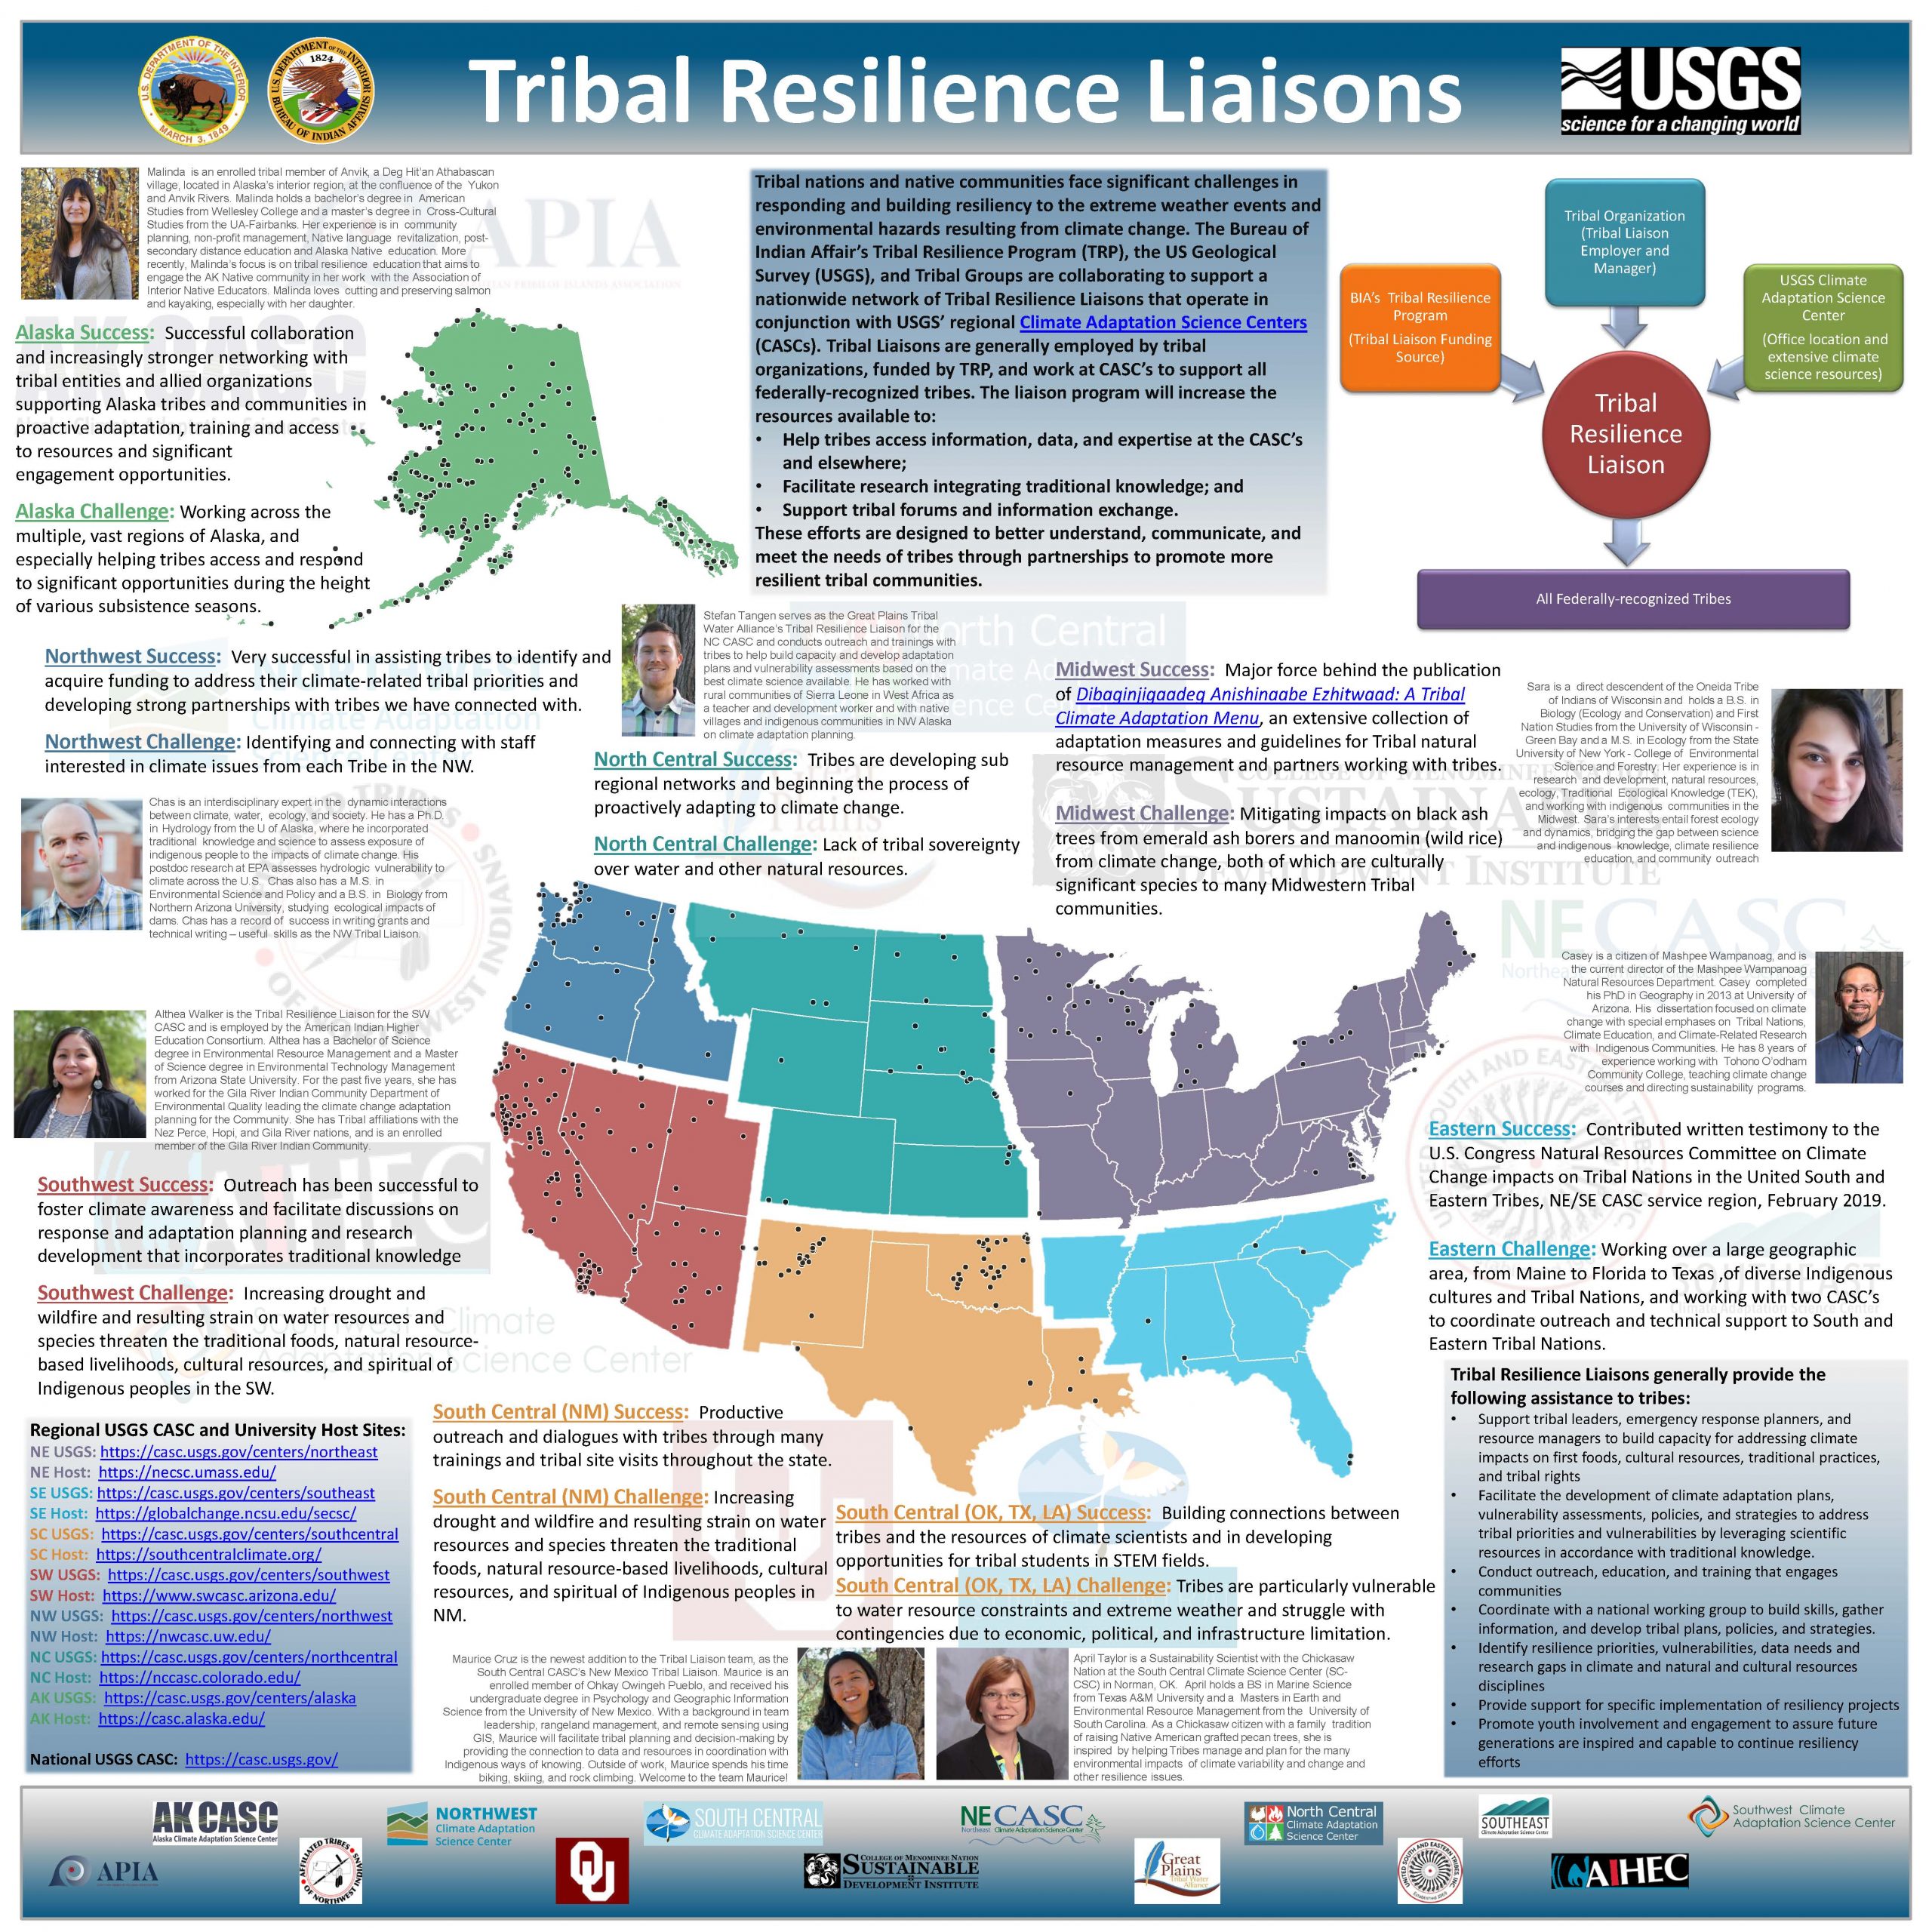 Image of Tribal Climate Liaison poster